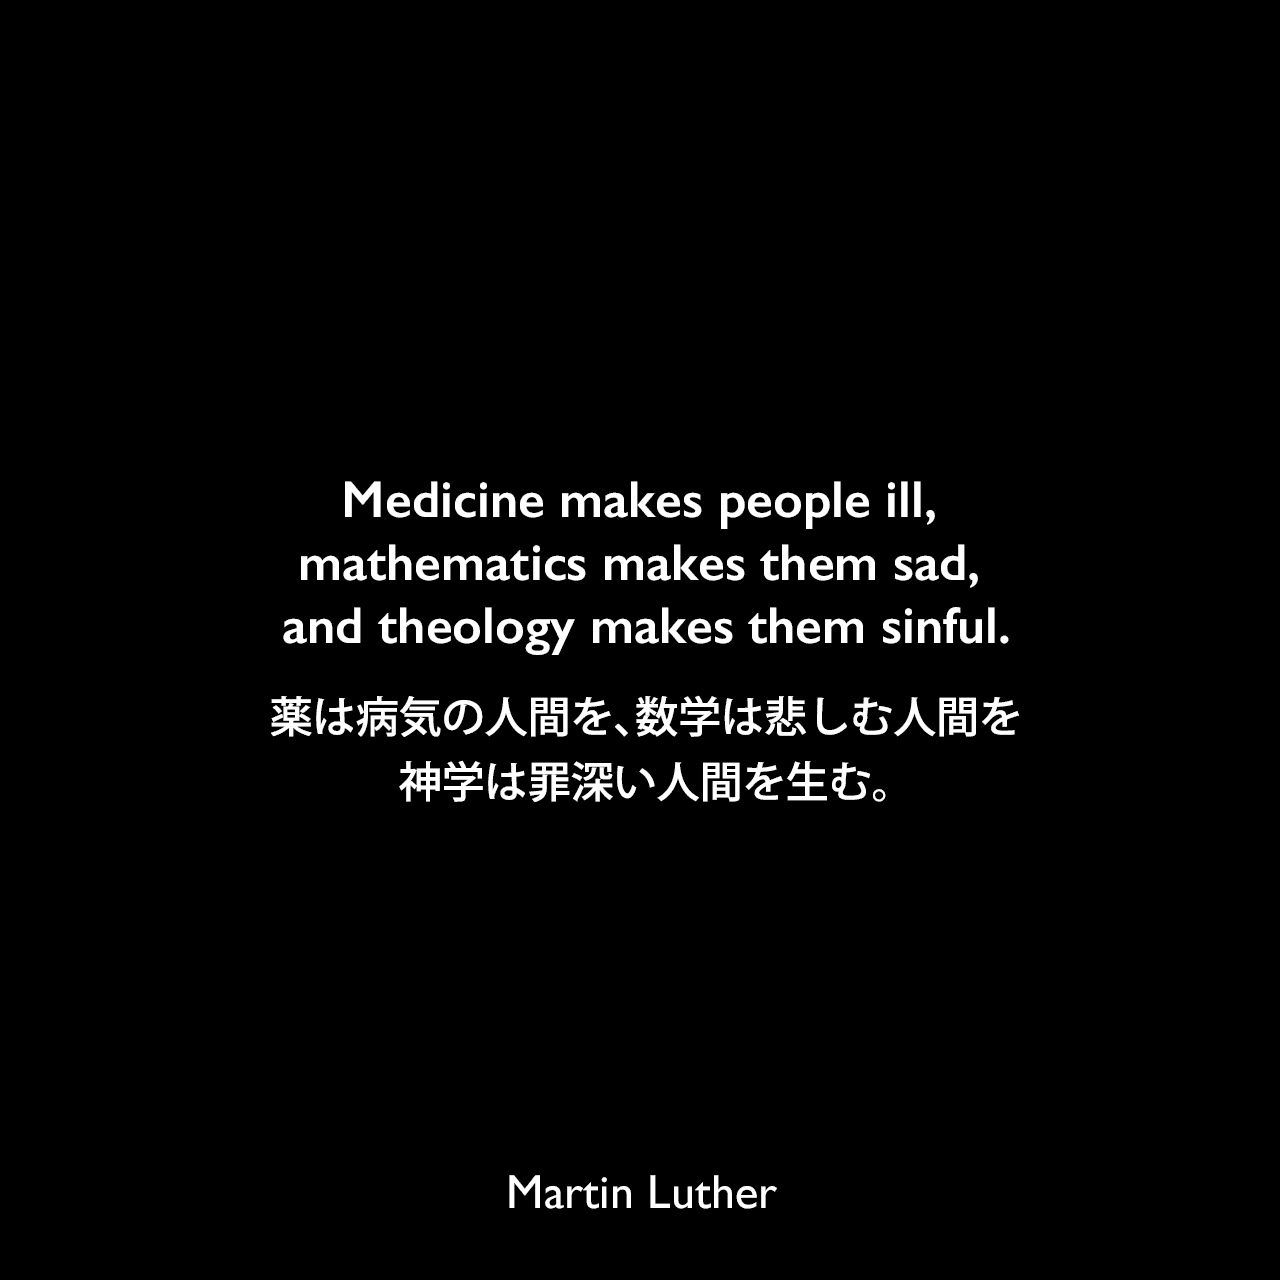 Medicine makes people ill, mathematics makes them sad, and theology makes them sinful.薬は病気の人間を、数学は悲しむ人間を、神学は罪深い人間を生む。Martin Luther